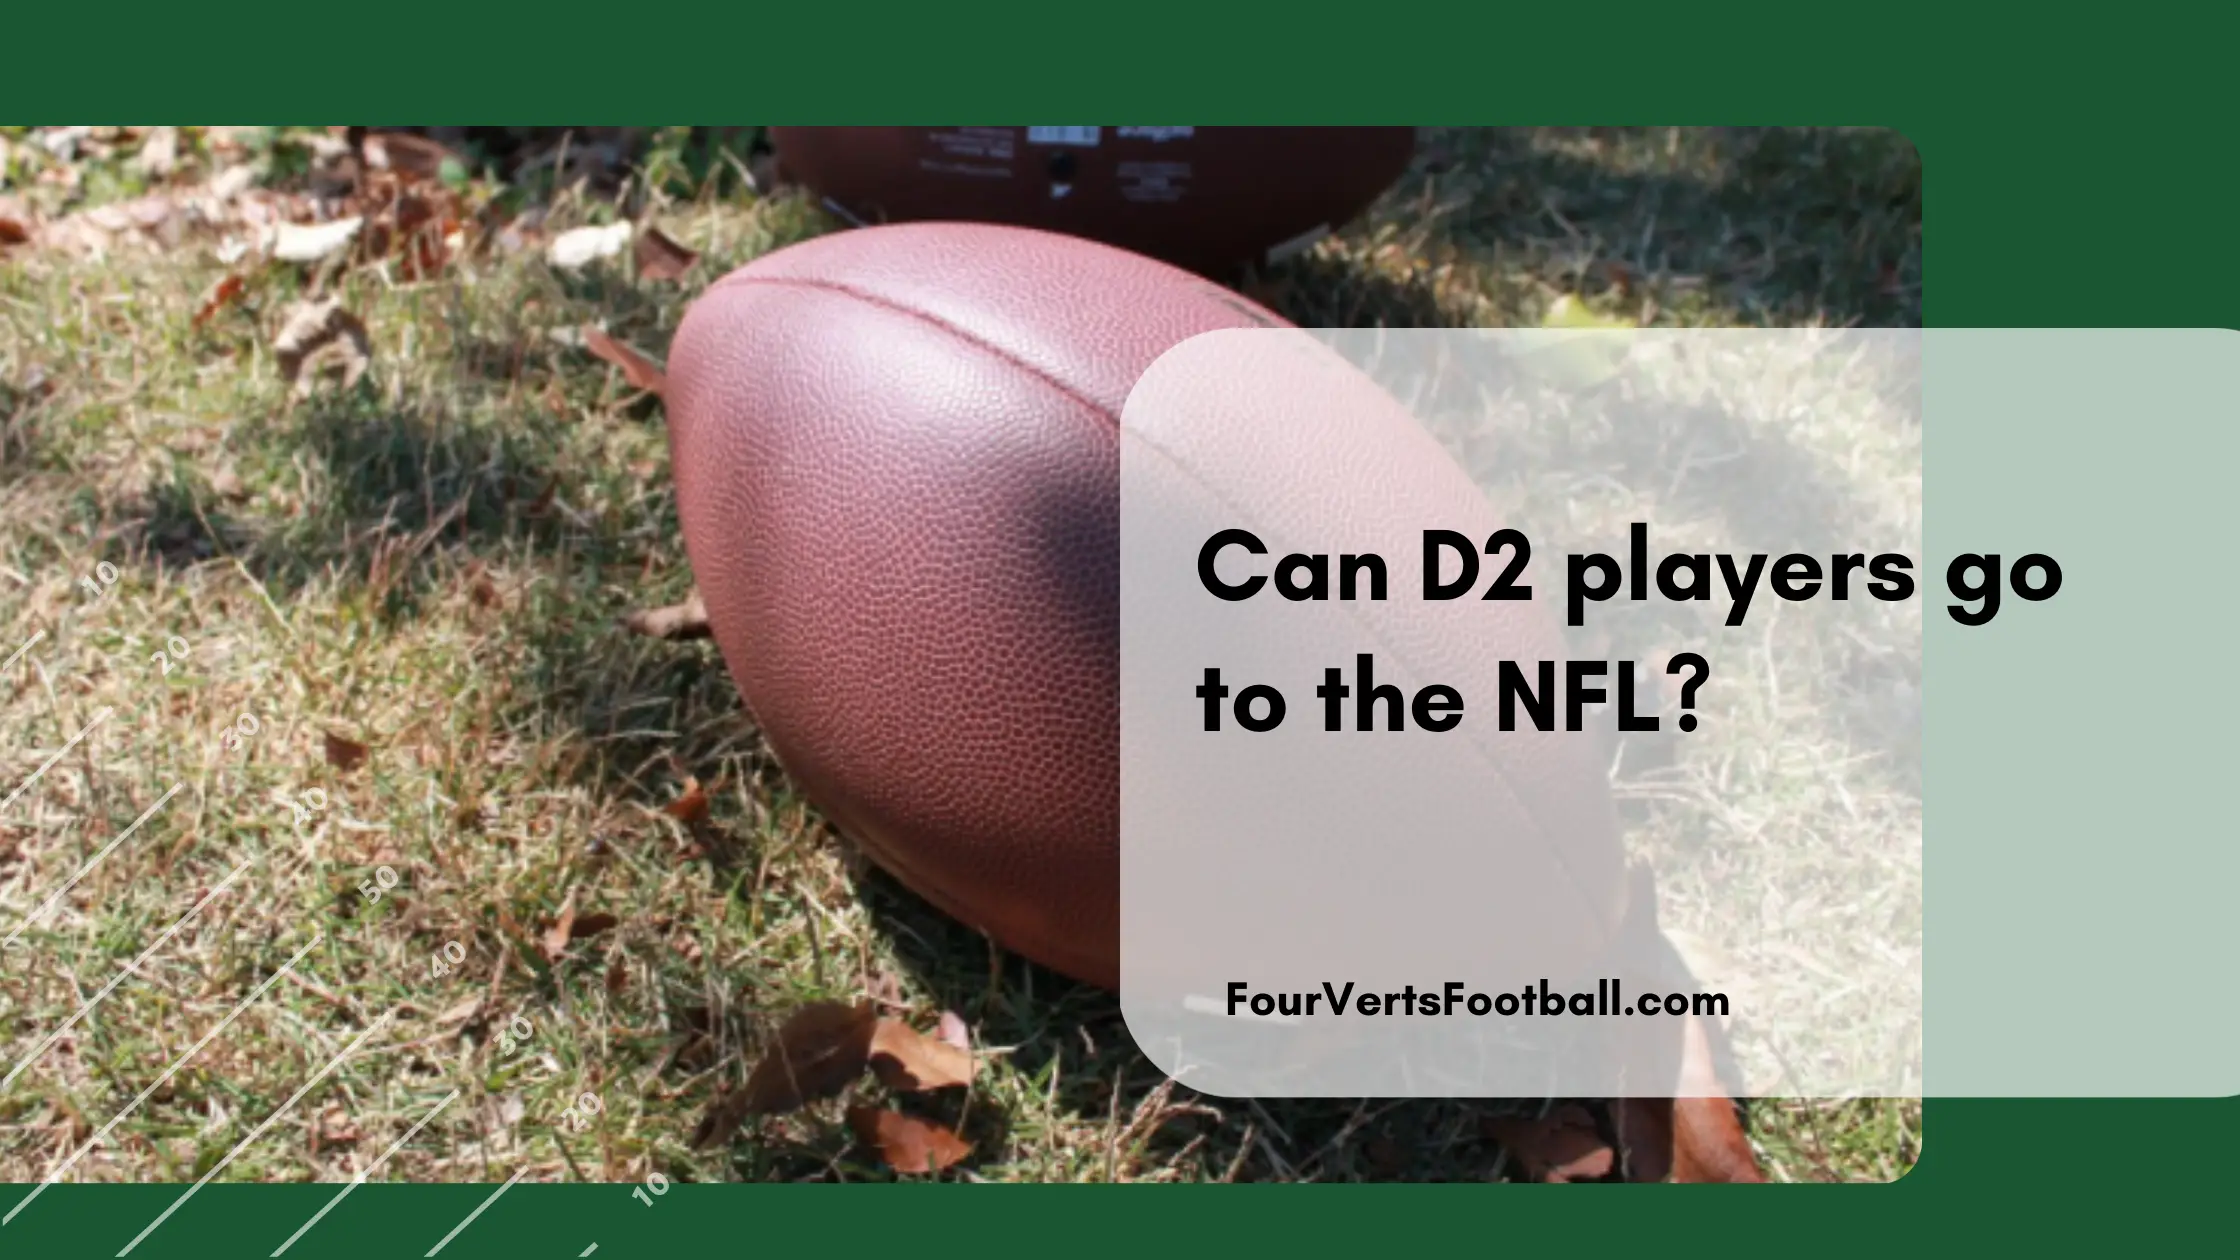 Can D2 players go to the NFL?